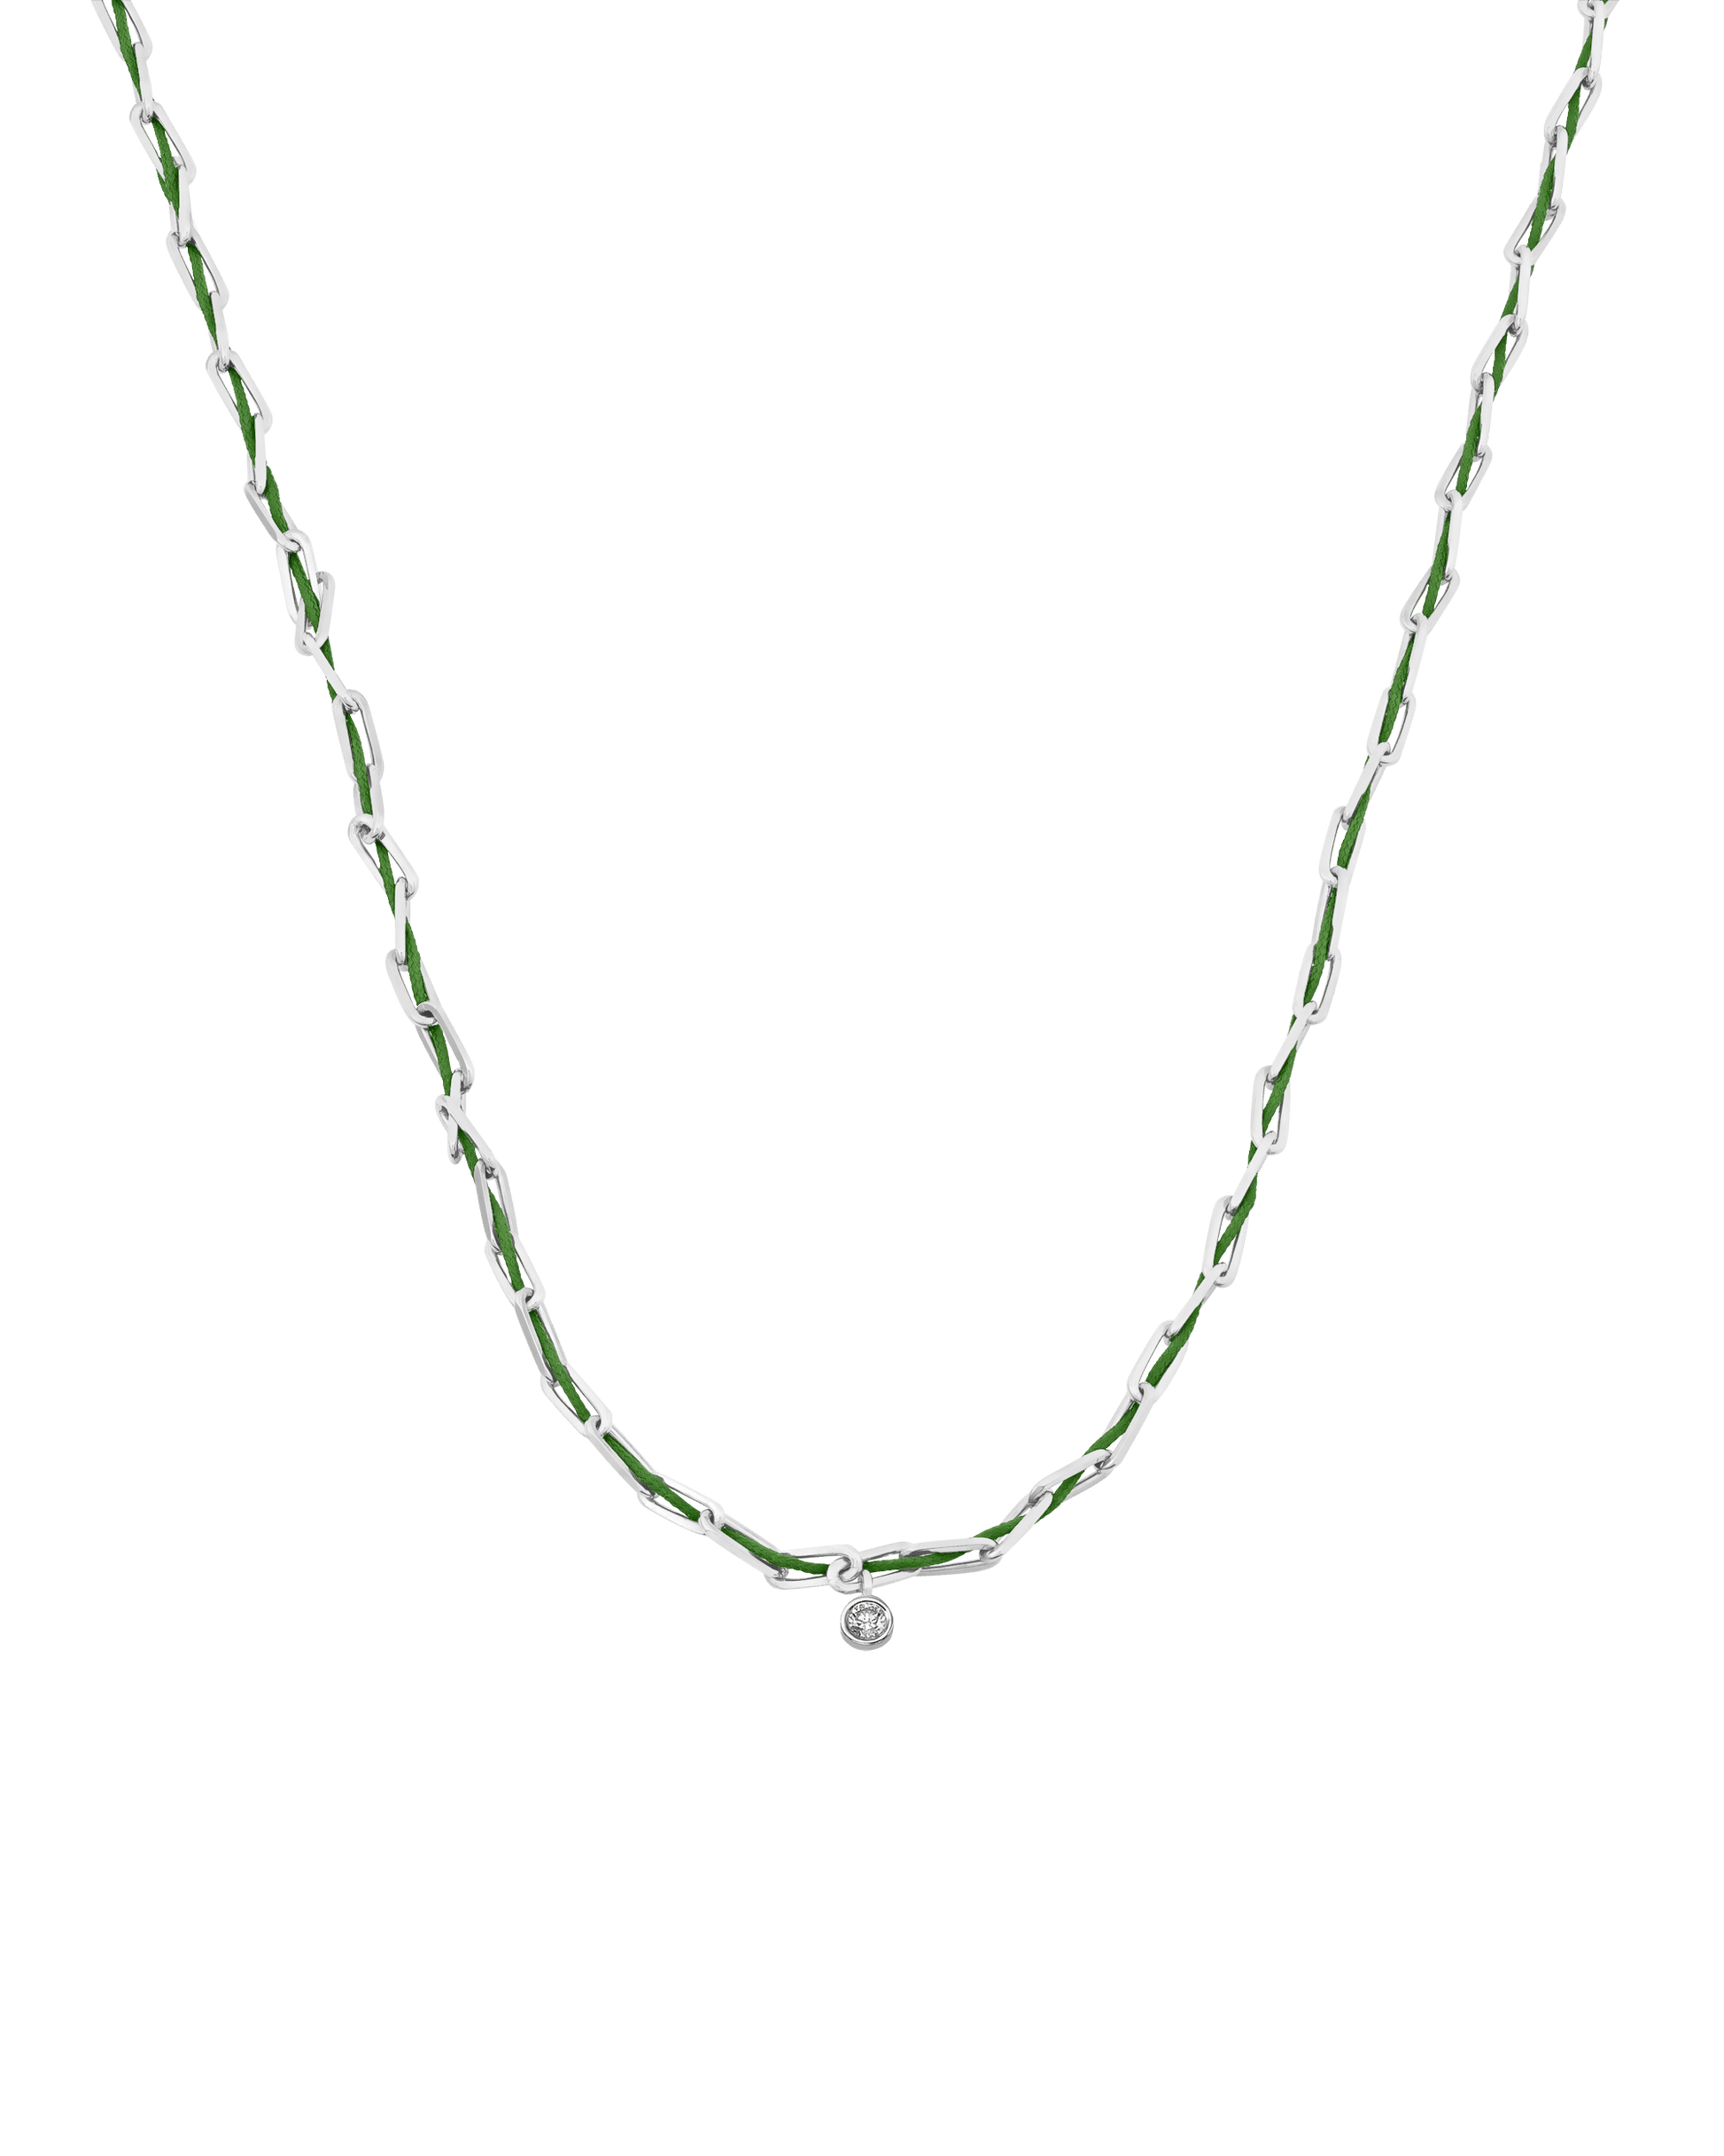 Twine Diamond Necklace - 925 Sterling Silver Necklaces magal-dev Mint Large: 0.10ct 16"